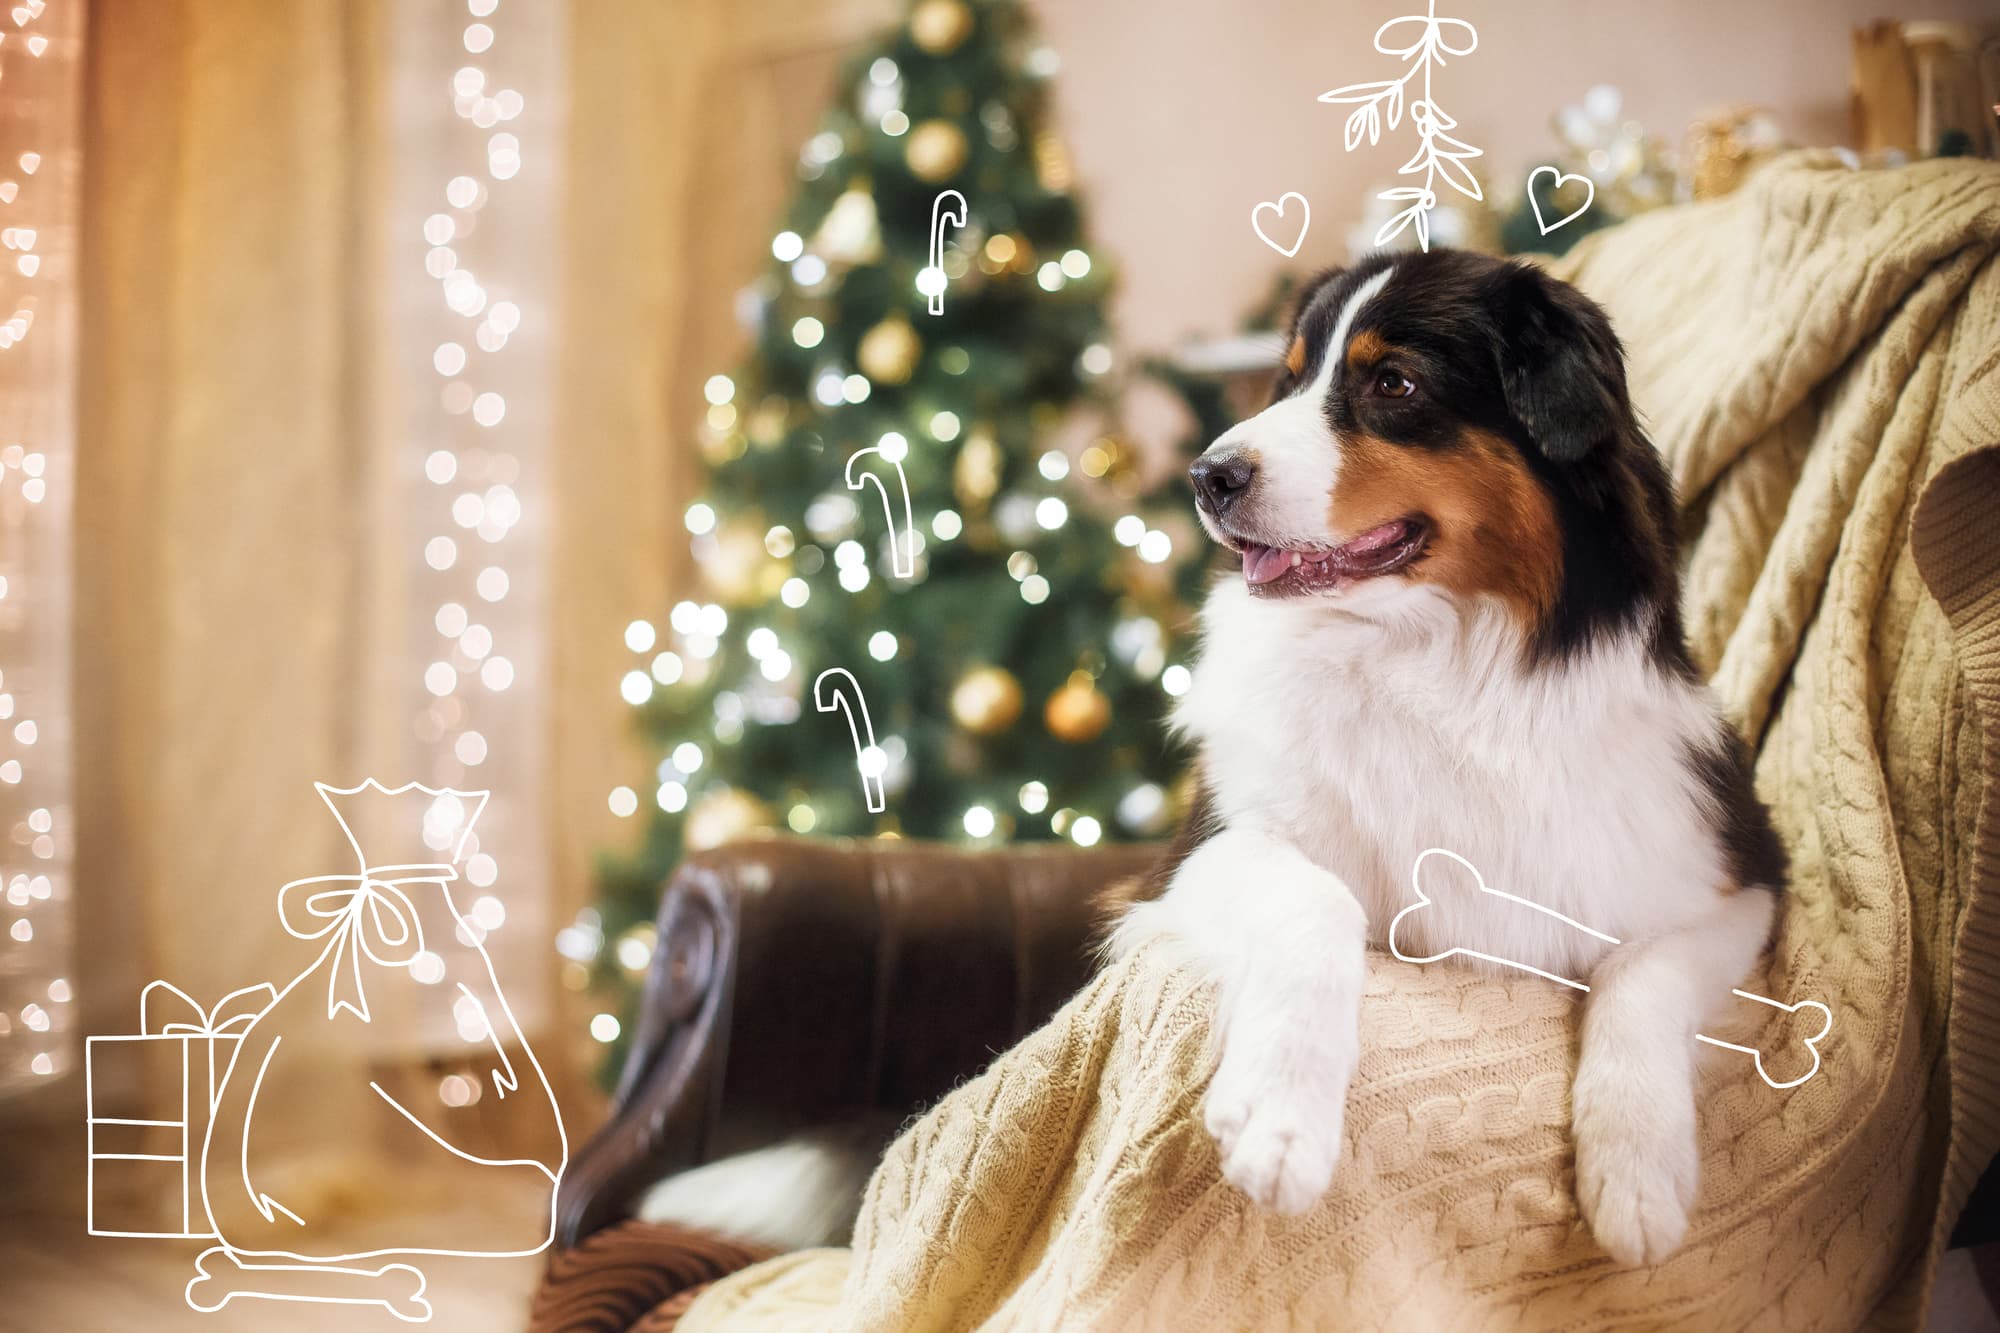 Christmas doggy gift guide 2019. A happy dog at Christmas.